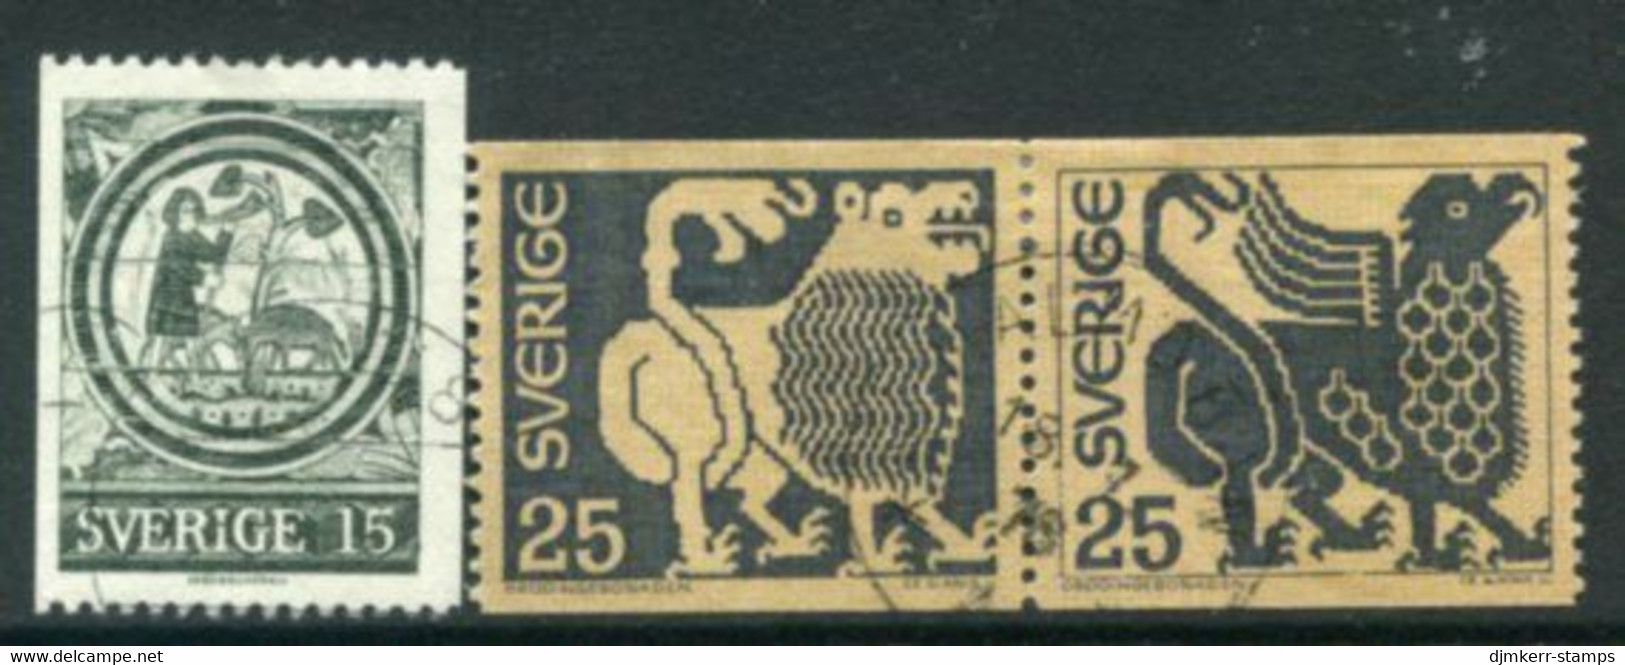 SWEDEN 1971 Definitive: Art Used.  Michel 706-08 - Used Stamps